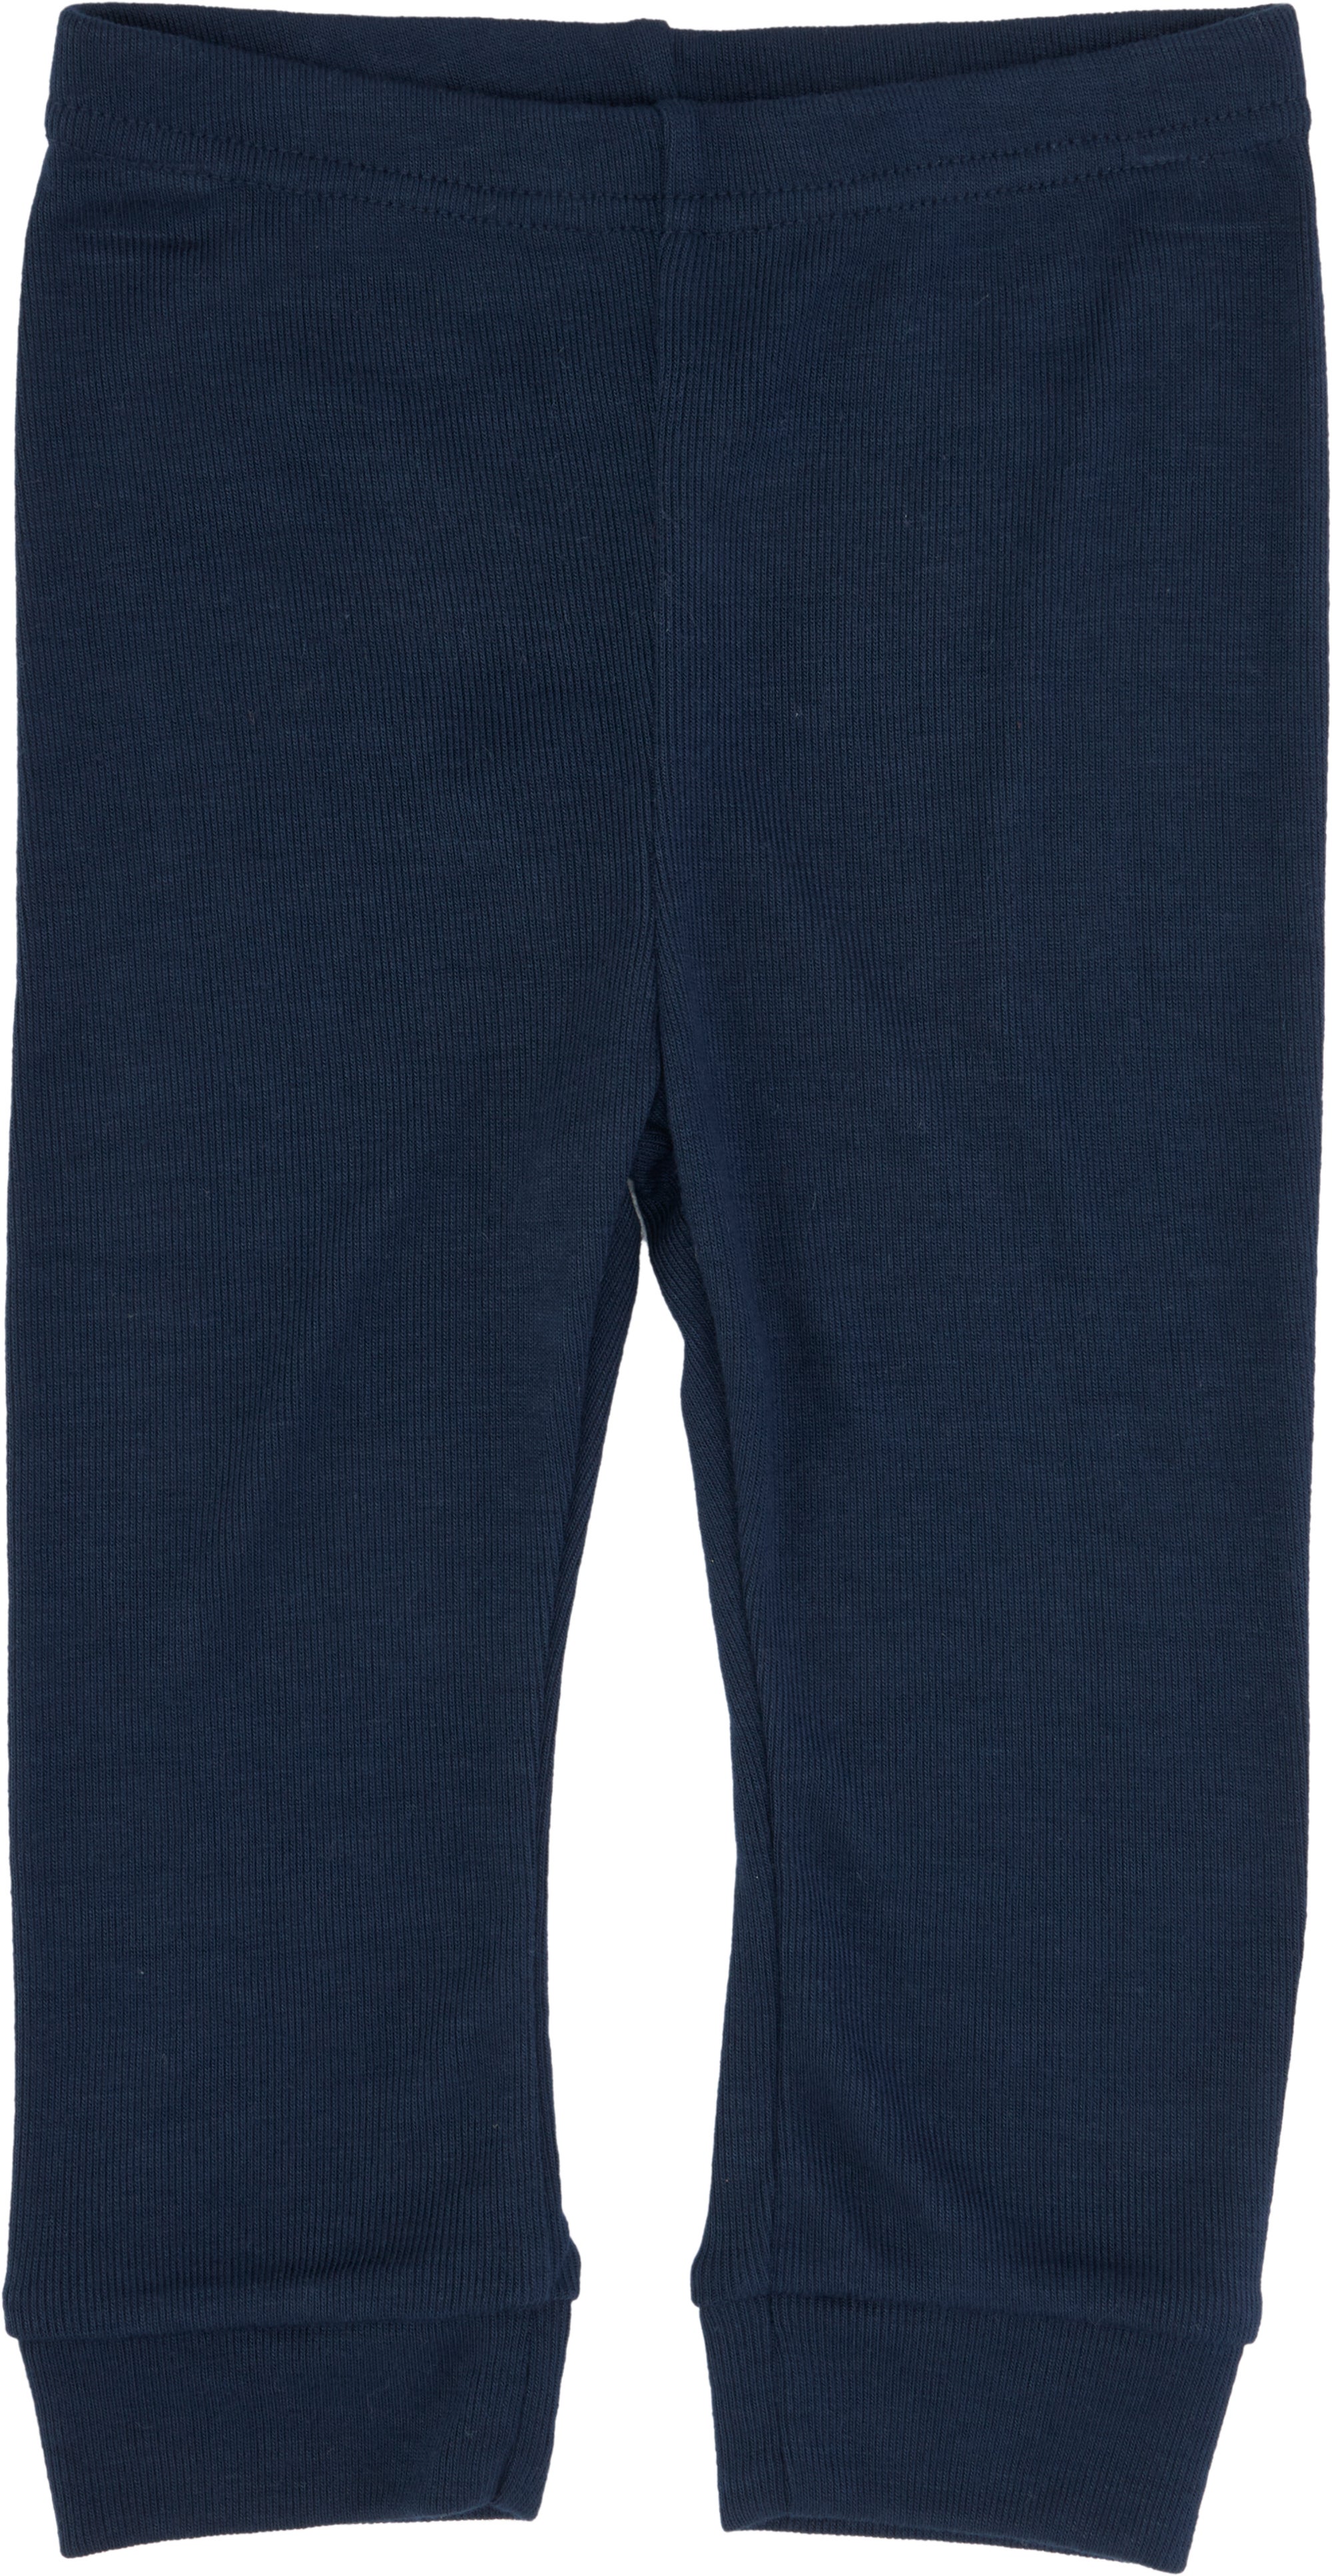 Infant Thermo Thermal Leggings in True Navy